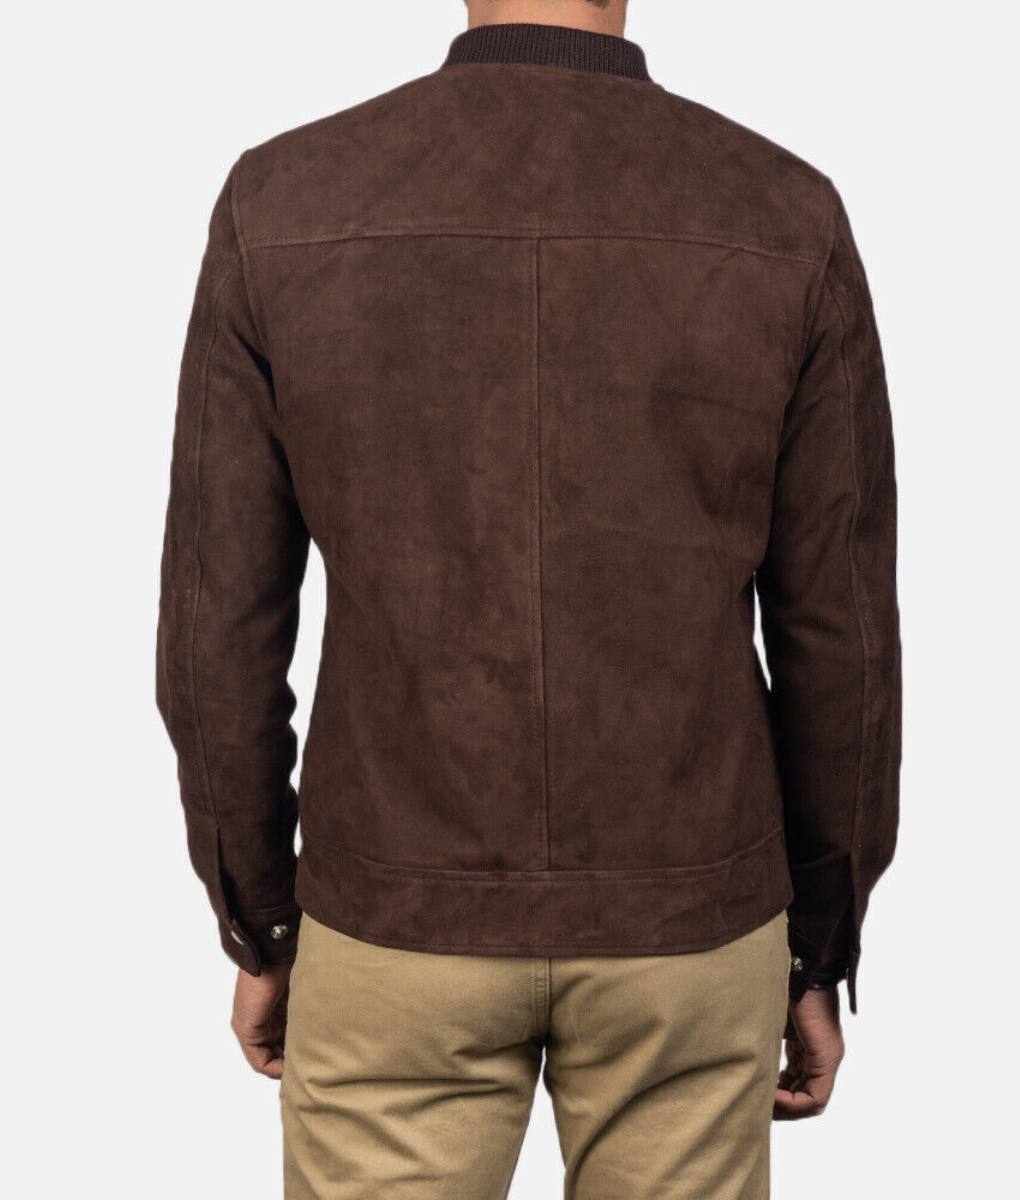 Mens Suede Leather Bomber Jacket